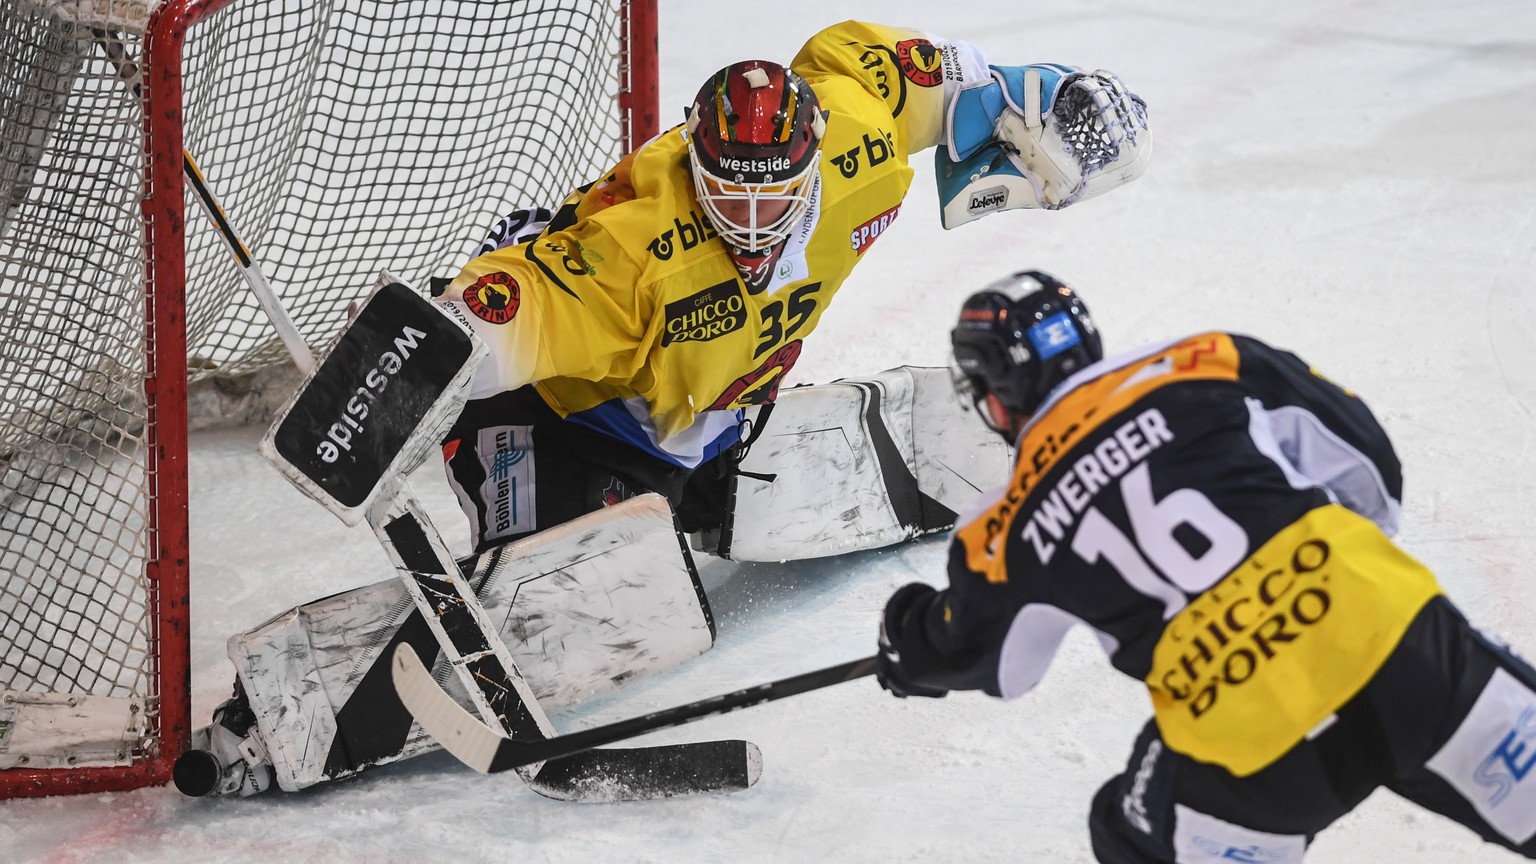 From left, Bern&#039;s goalkeeper Tomi Karhunen and Ambri&#039;s player Dominic Zwerger, during the preliminary round game of National League A (NLA) Swiss Championship 2019/20 between HC Ambri Piotta ...